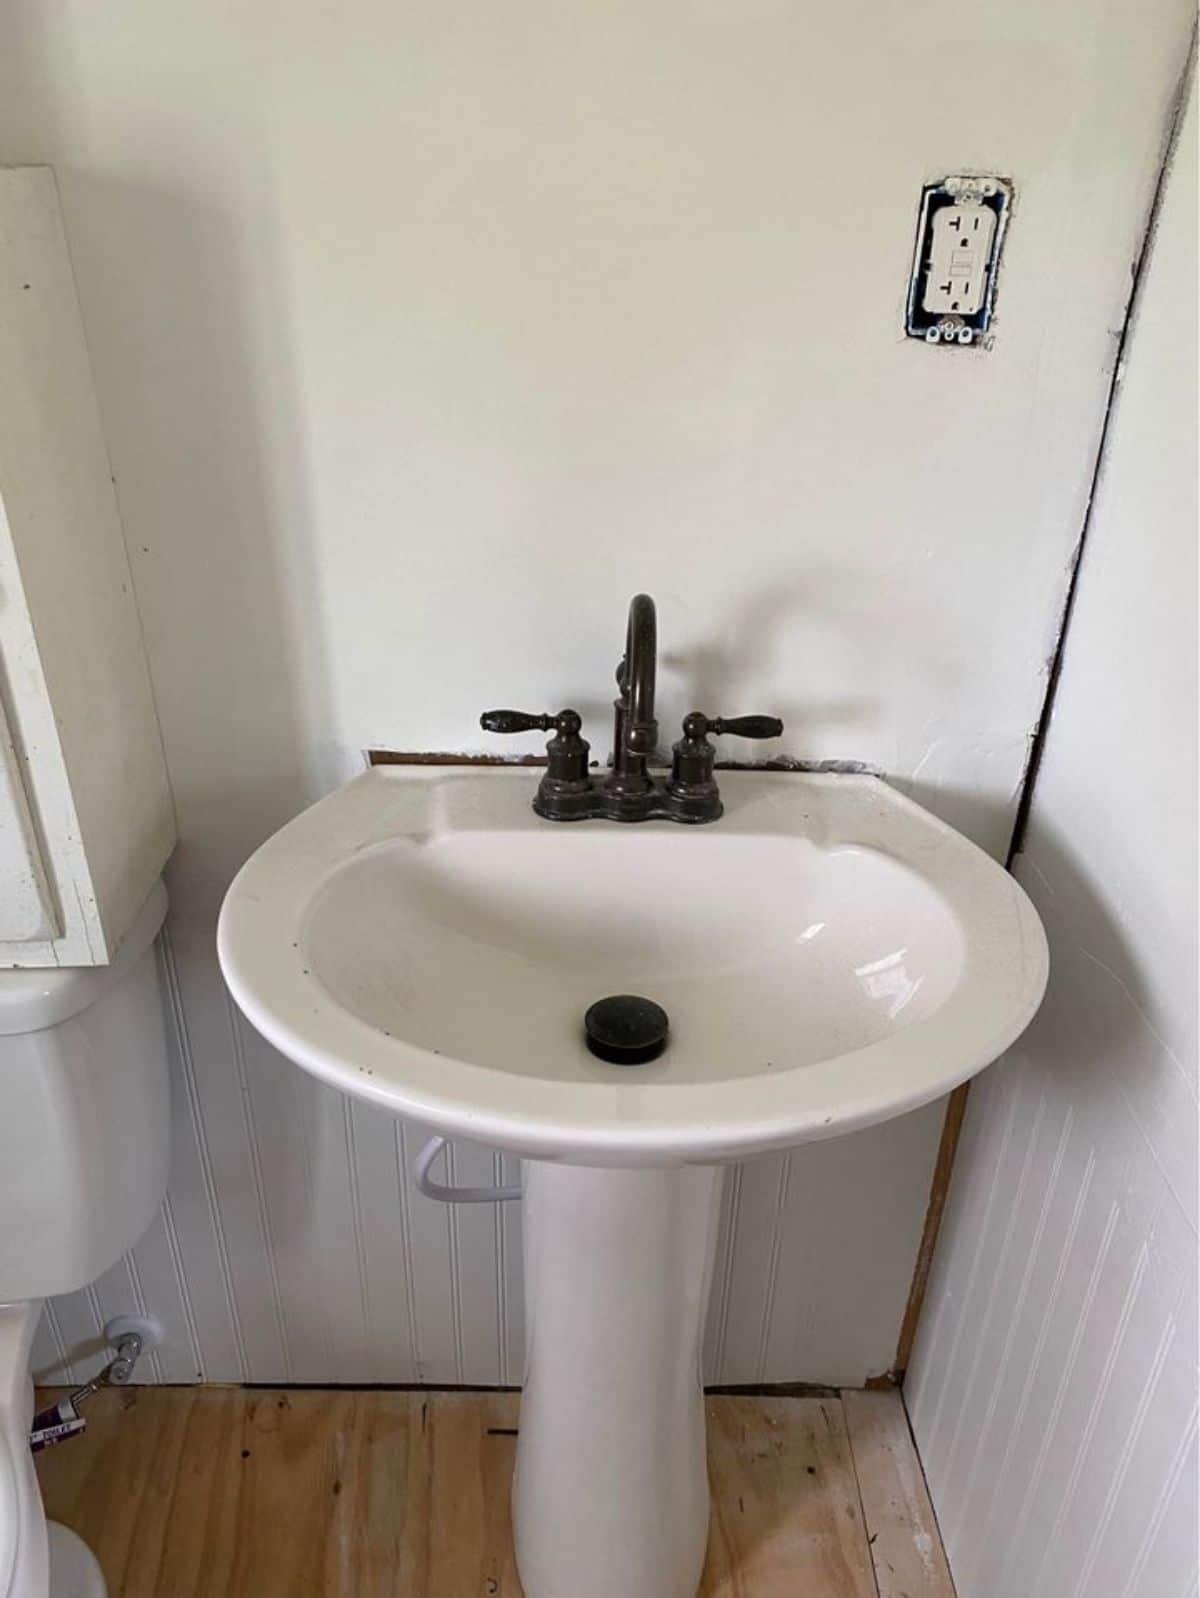 Bathroom of 20’ Tiny House on Trailer has a sink and toilet